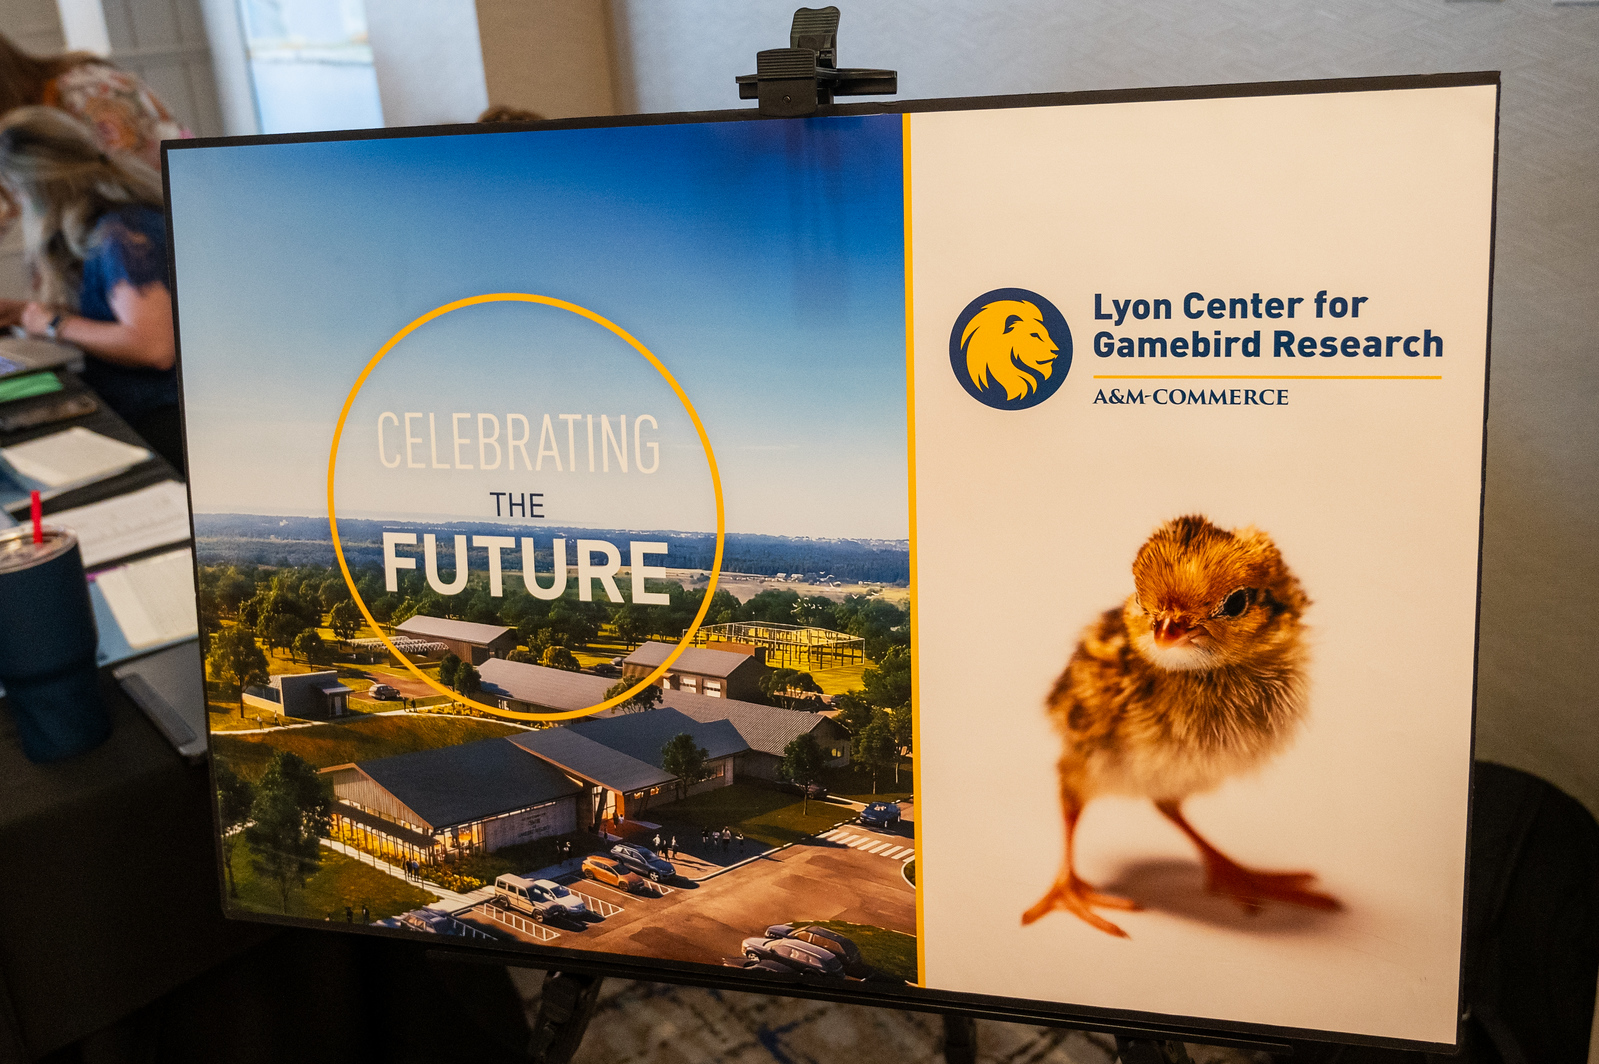 This is a photo of a poster that advertises the new Lyon Center. The left side of the poster shows a computer generated image of the center. The right side of the poster shows a quail chick.